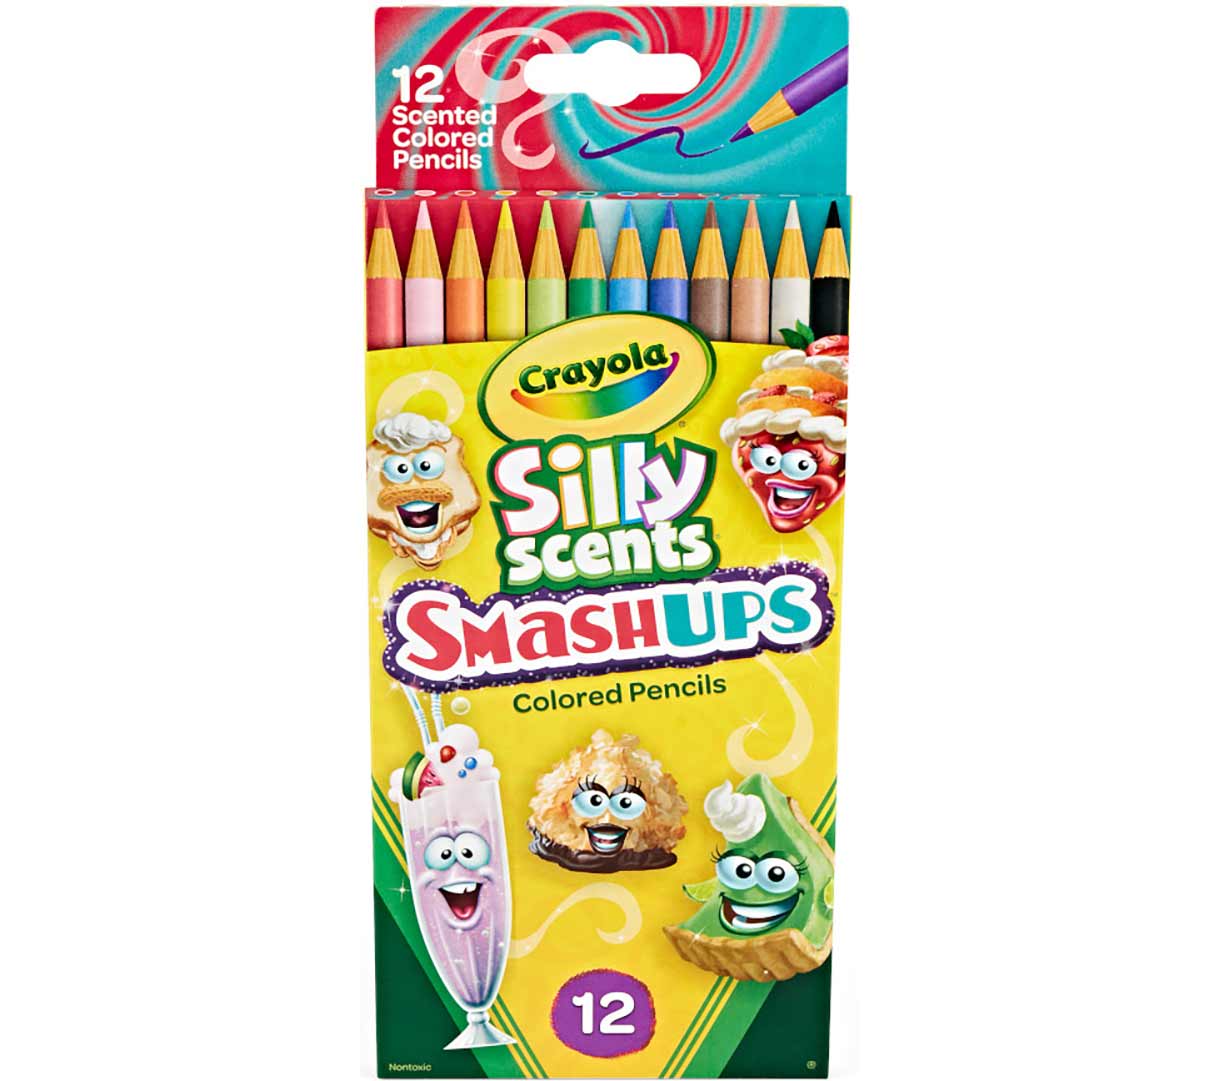 Silly Scents Smashups Scented Colored Pencils | Crayola.com